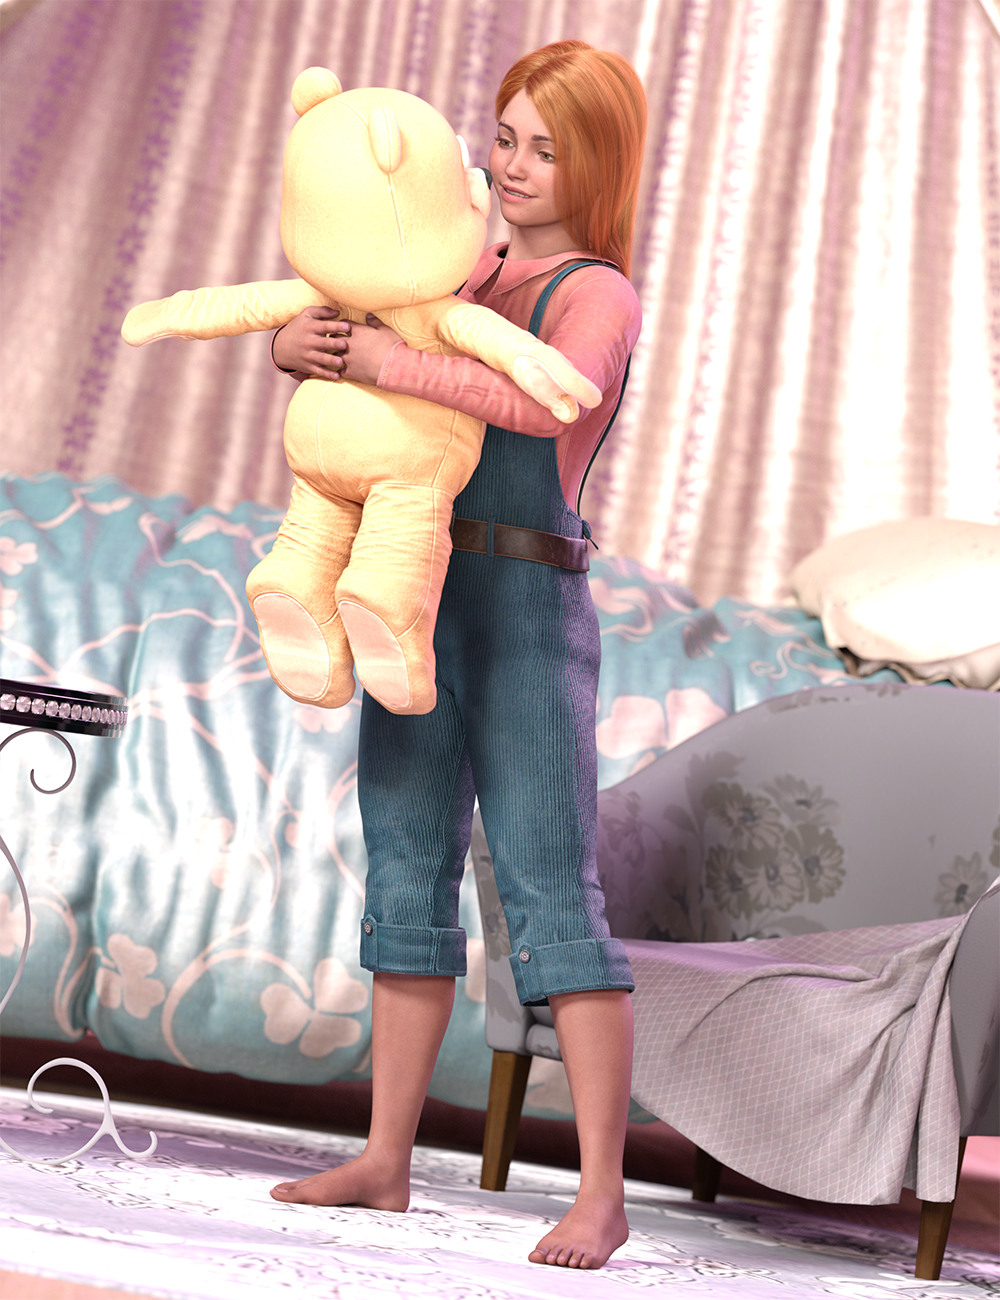 Hug a Teddy Poses for Teddy and Genesis 9 by: Ensary, 3D Models by Daz 3D